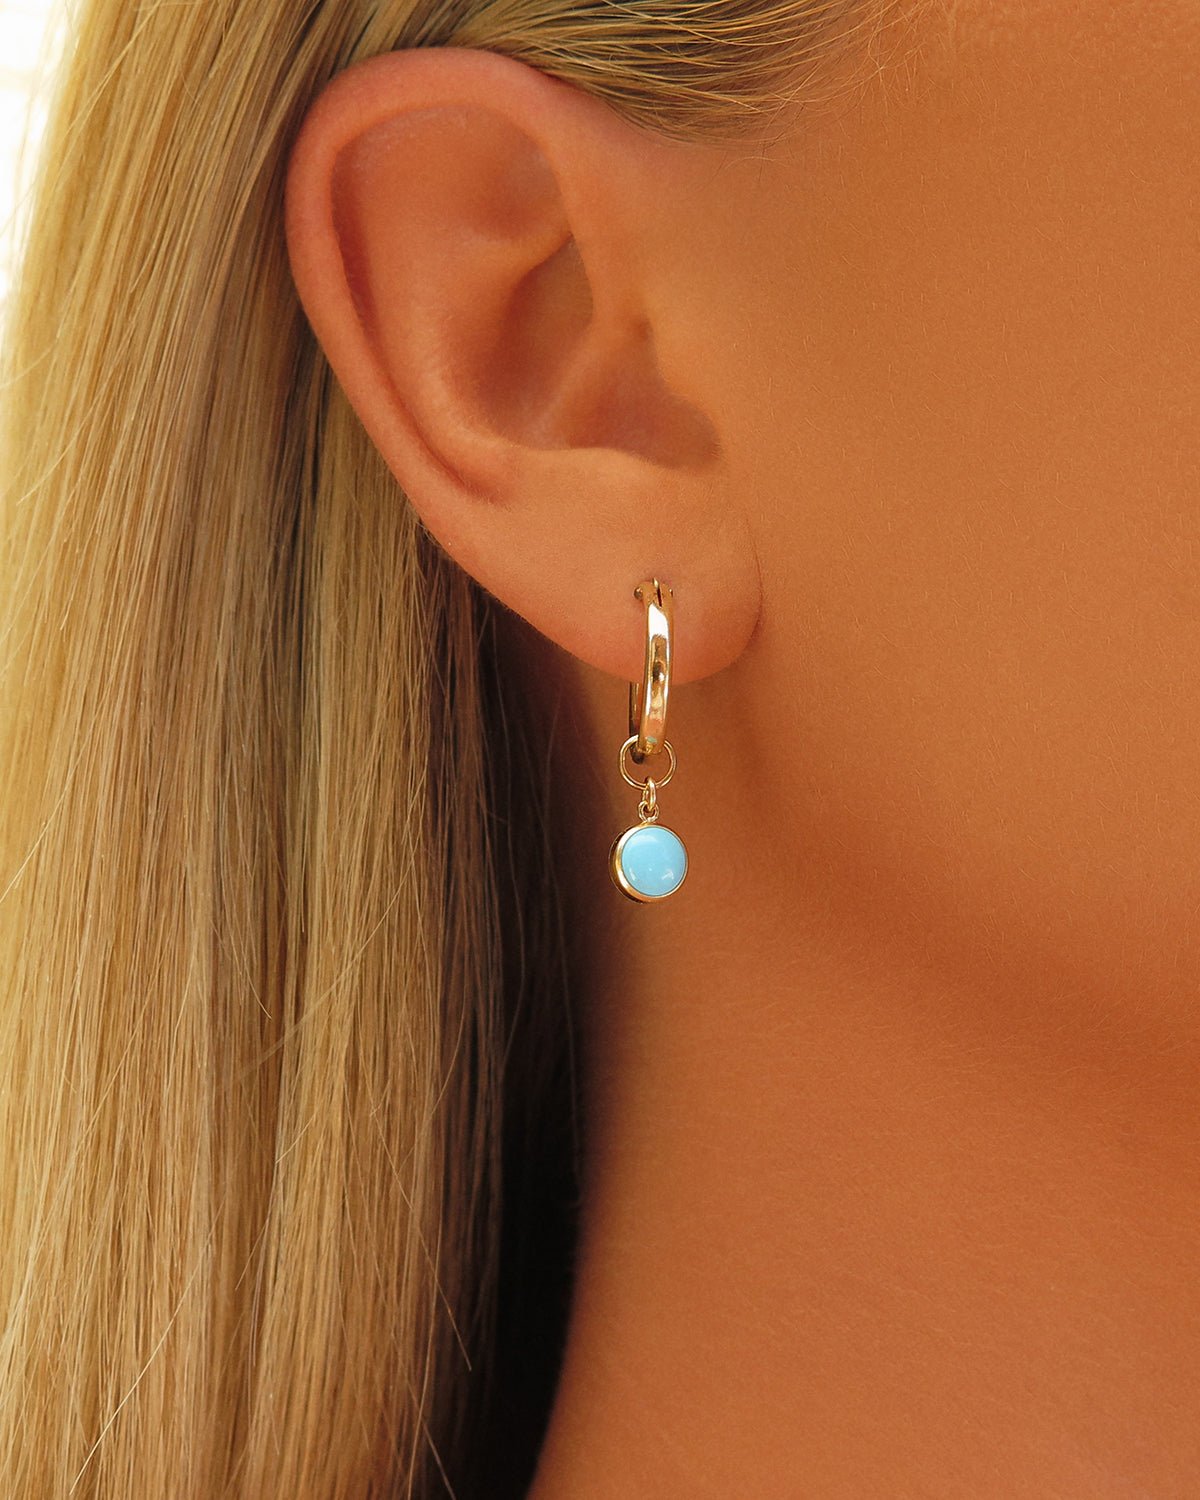 TURQUOISE THICK HOOP EARRINGS- 14k Yellow Gold Fill - The Littl - 12mm - Earrings